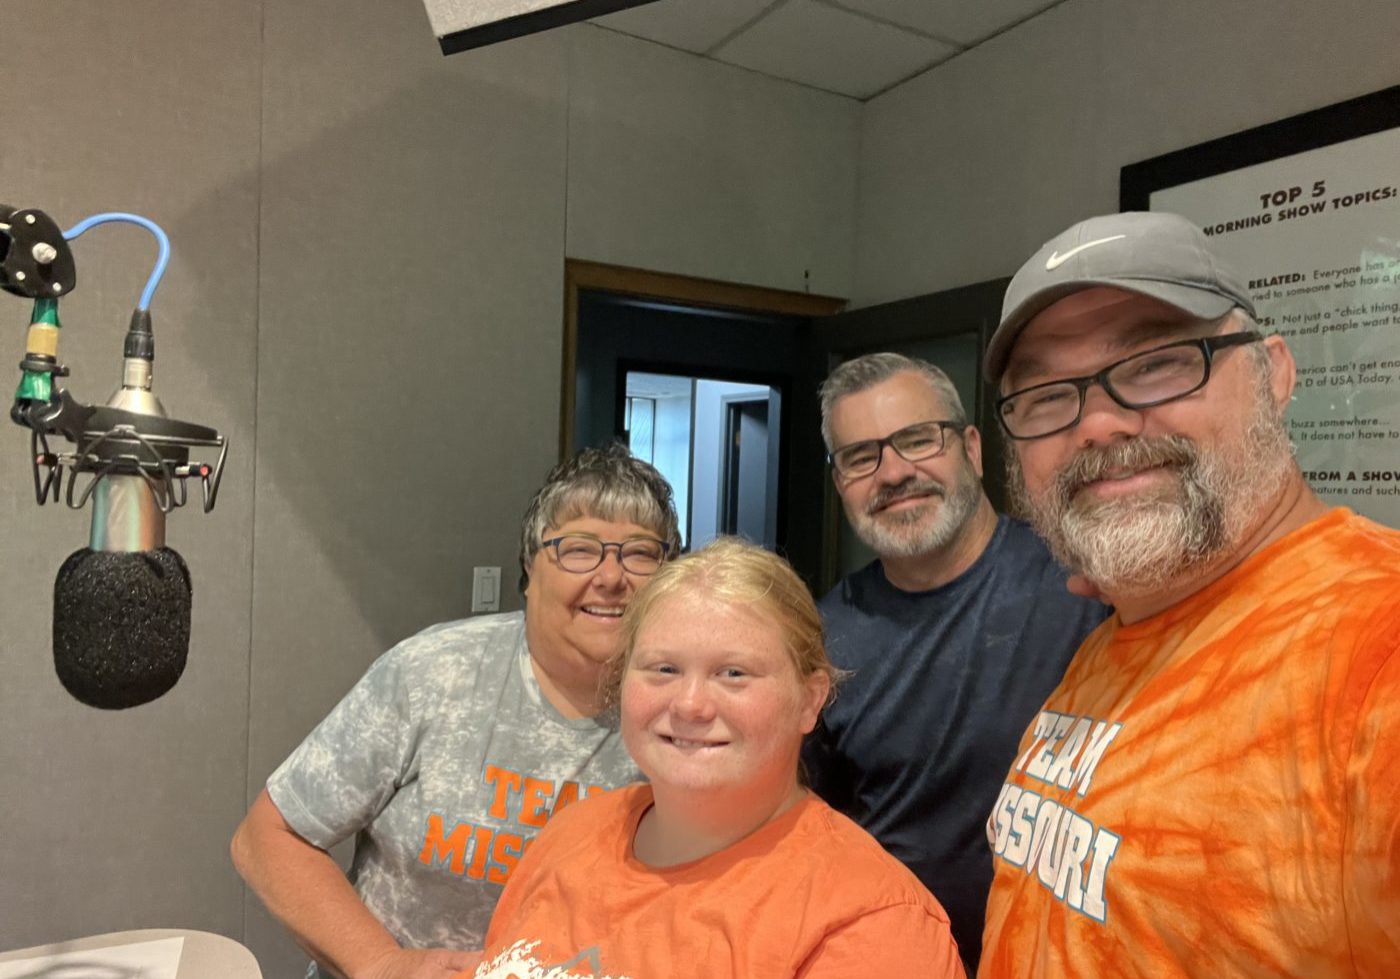 SOMO athlete Abby Bax and staff members Susan Shaffer and Luke Lamb had the chance to go on News Radio KWOS's coaches show on Saturday, June 18. The three spoke about Team Missouri's recent trip to the Special Olympics USA Games in Orlando, Fla. They also previewed the upcoming State Outdoor Games in Jefferson City, Oct. 7-9!